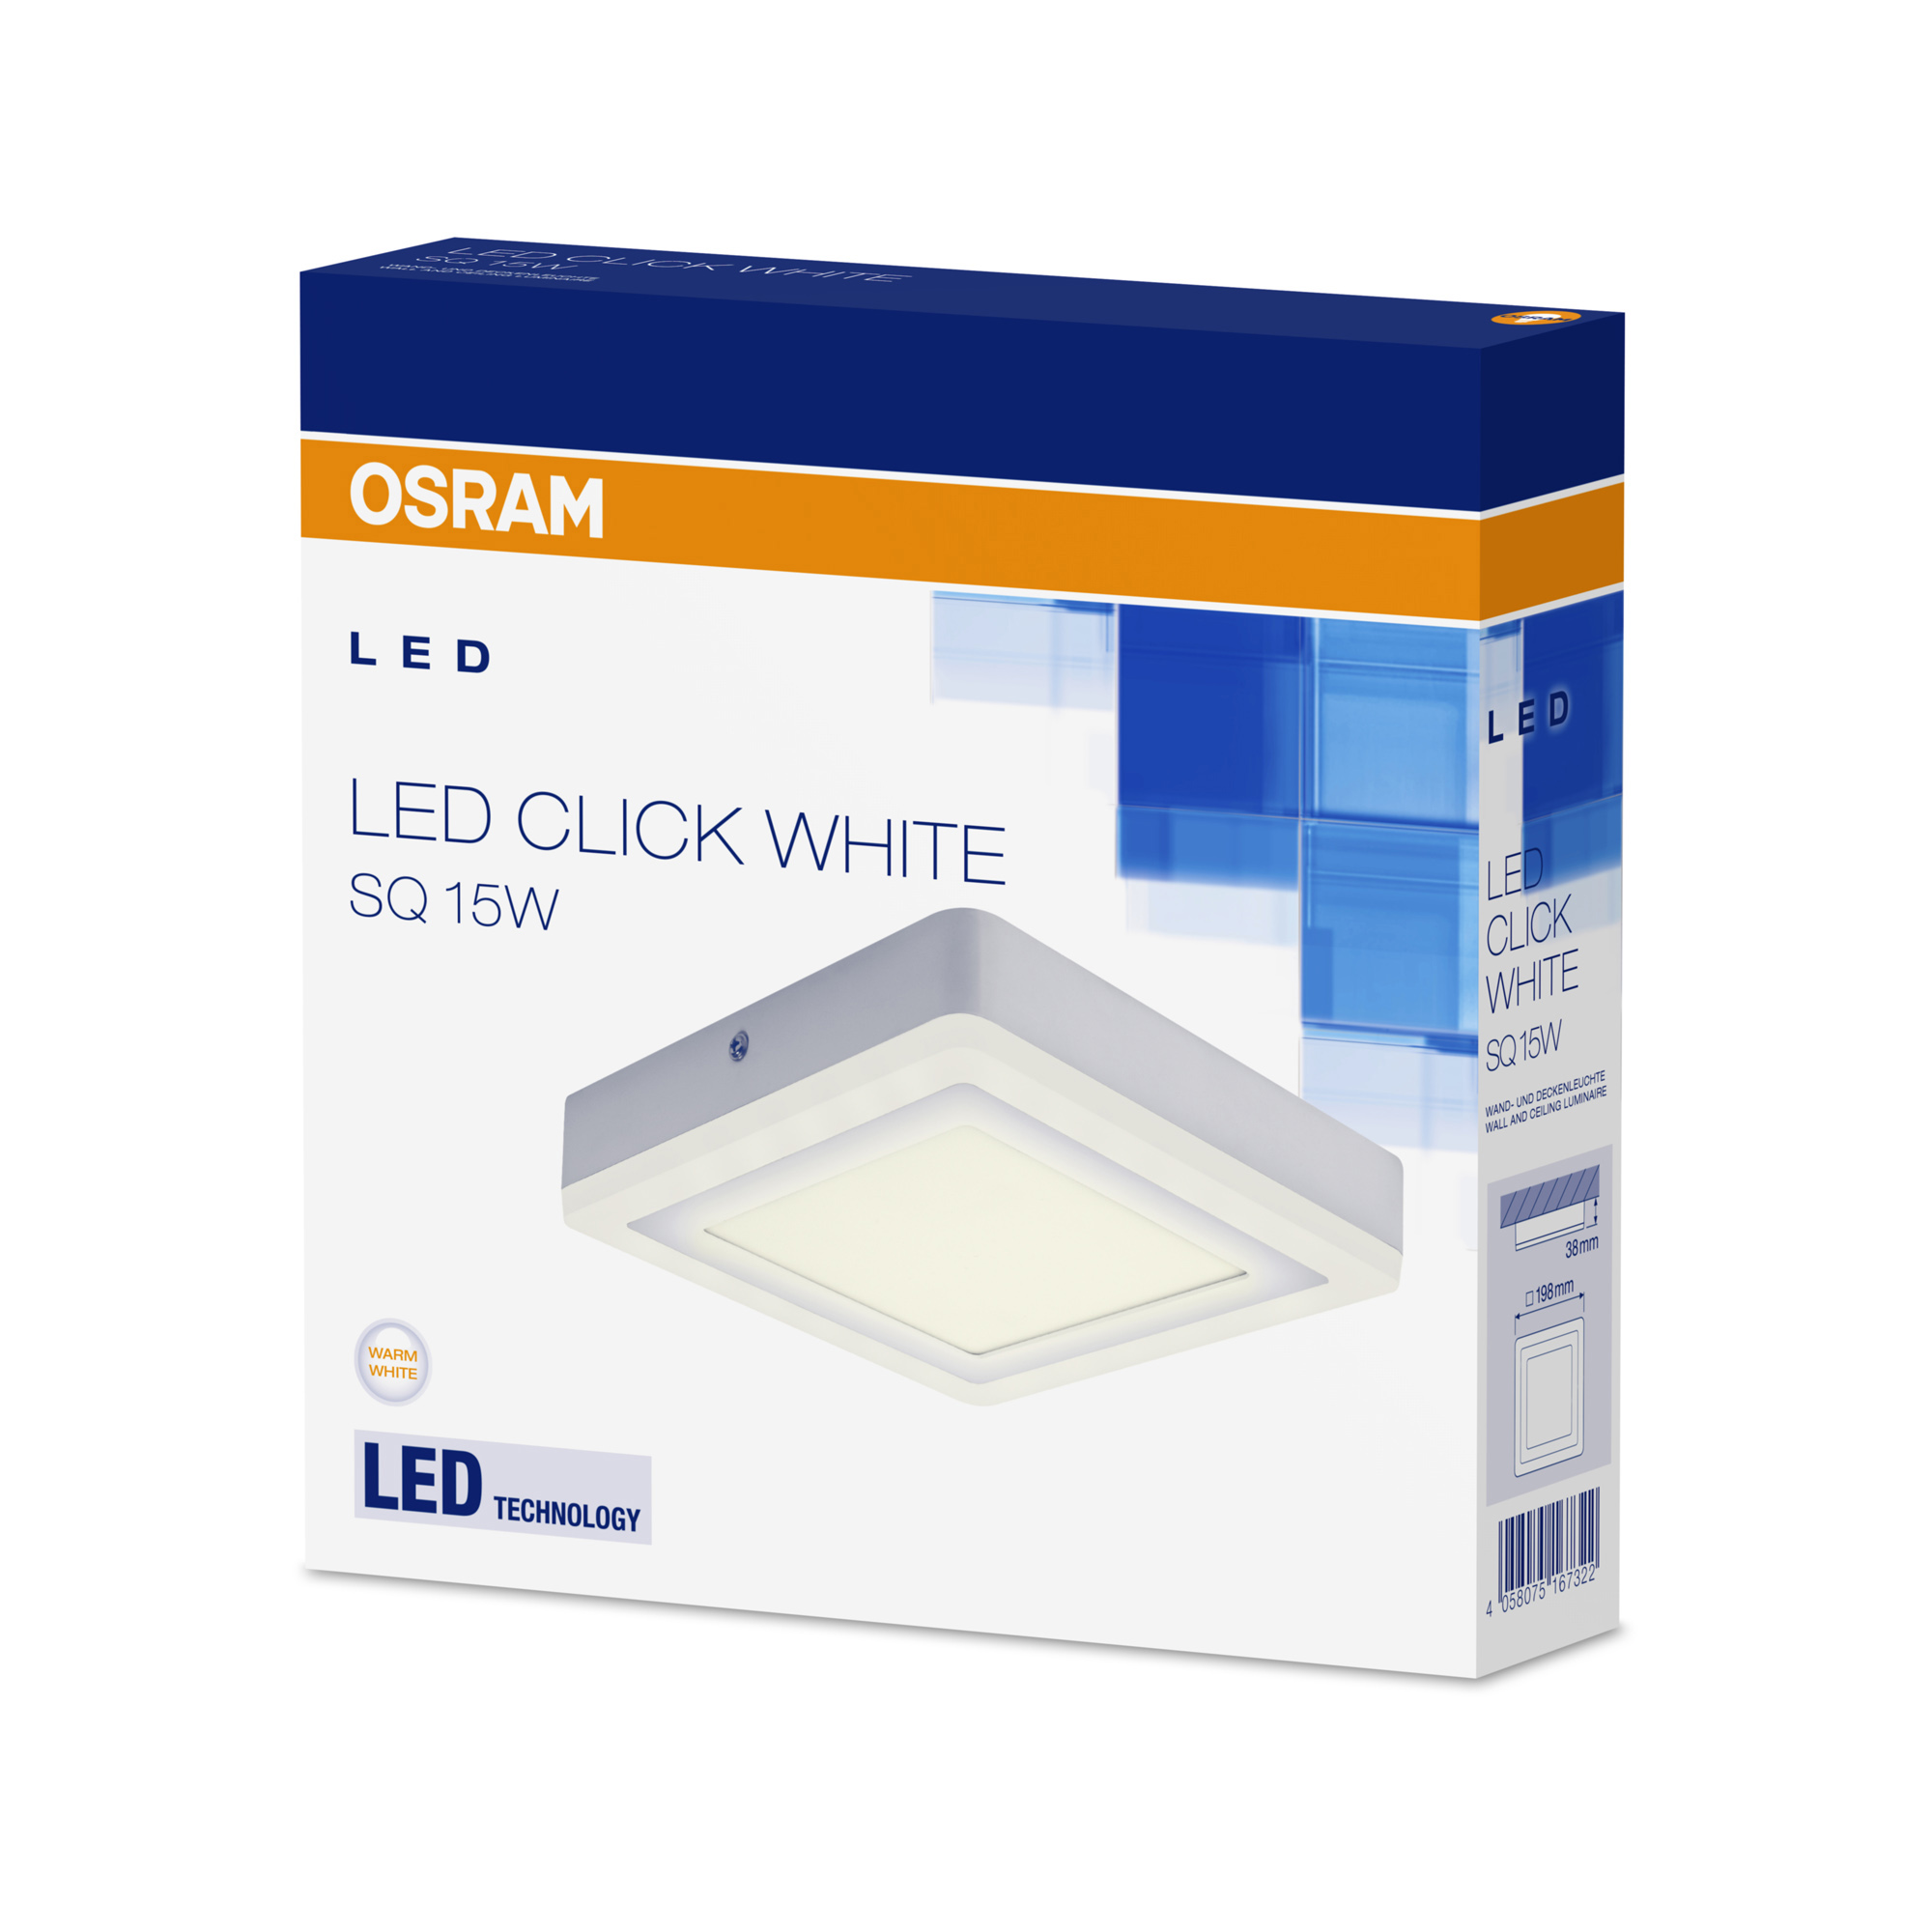 Osram LED CLICK WHITE Square Ceiling and Wall Luminaire 20cm 15W 750lm 3000K CRI80